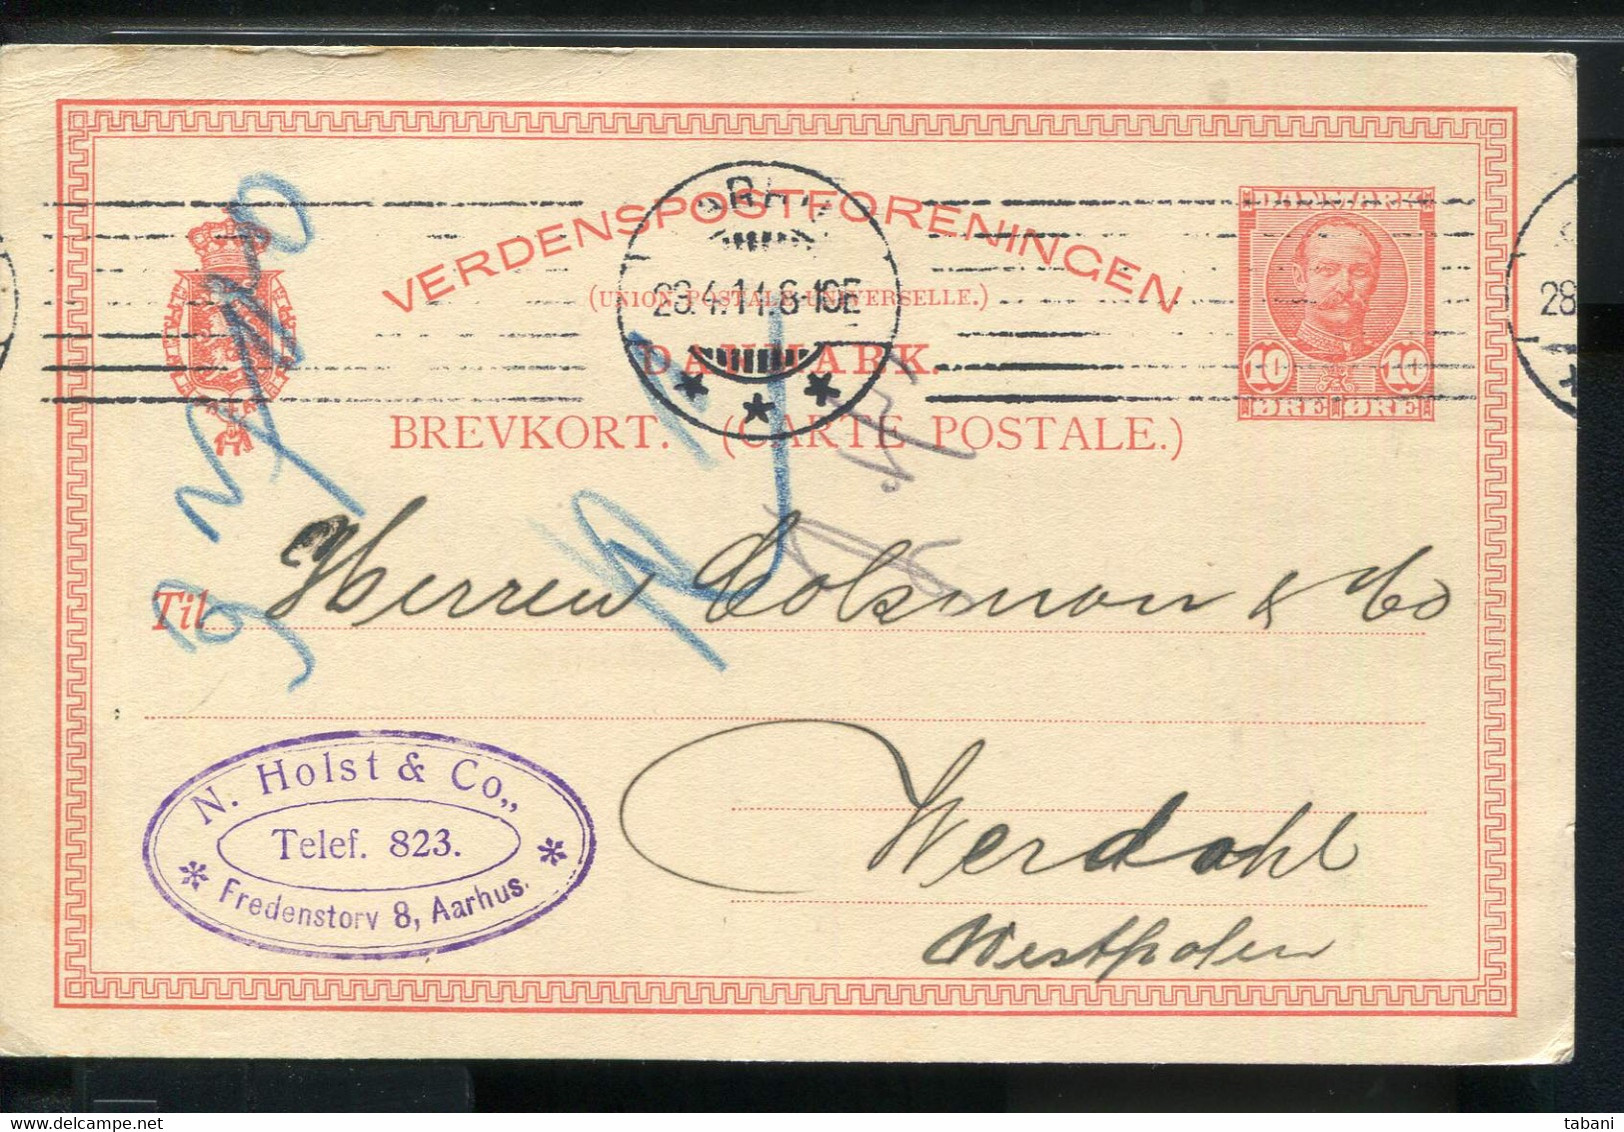 DENMARK 1911 POSTAL STATIONARY CARD TO WERDHOL GERMANY..PRIVATE CANCEL... - Covers & Documents